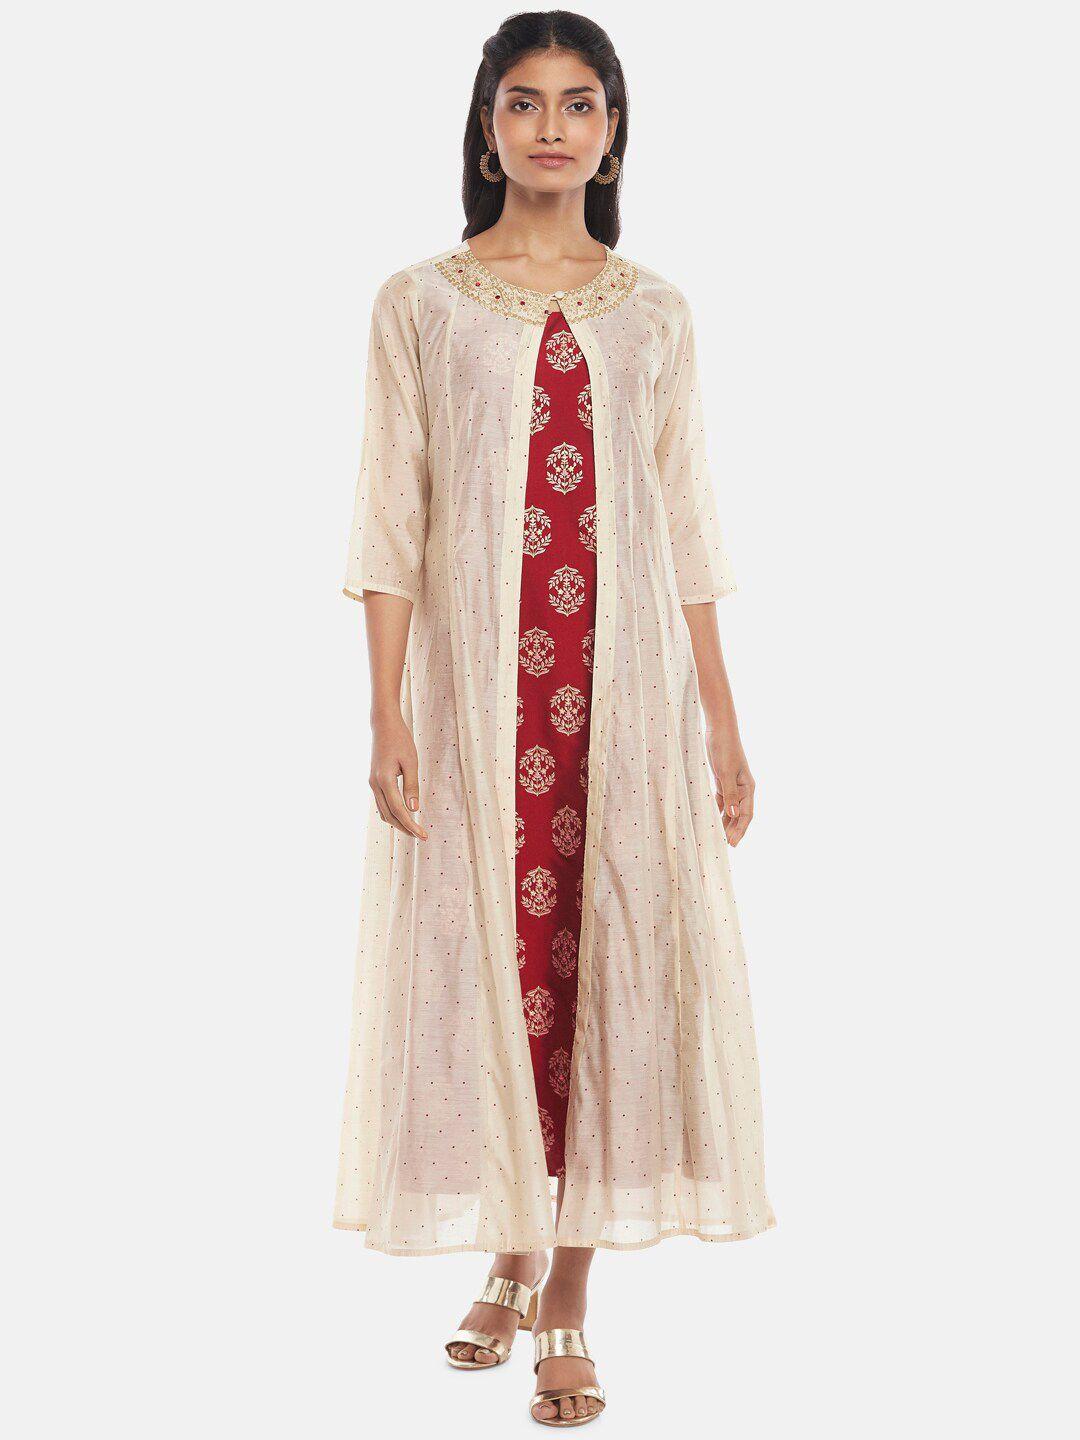 rangmanch by pantaloons beige & maroon ethnic motifs embroidered a-line maxi dress